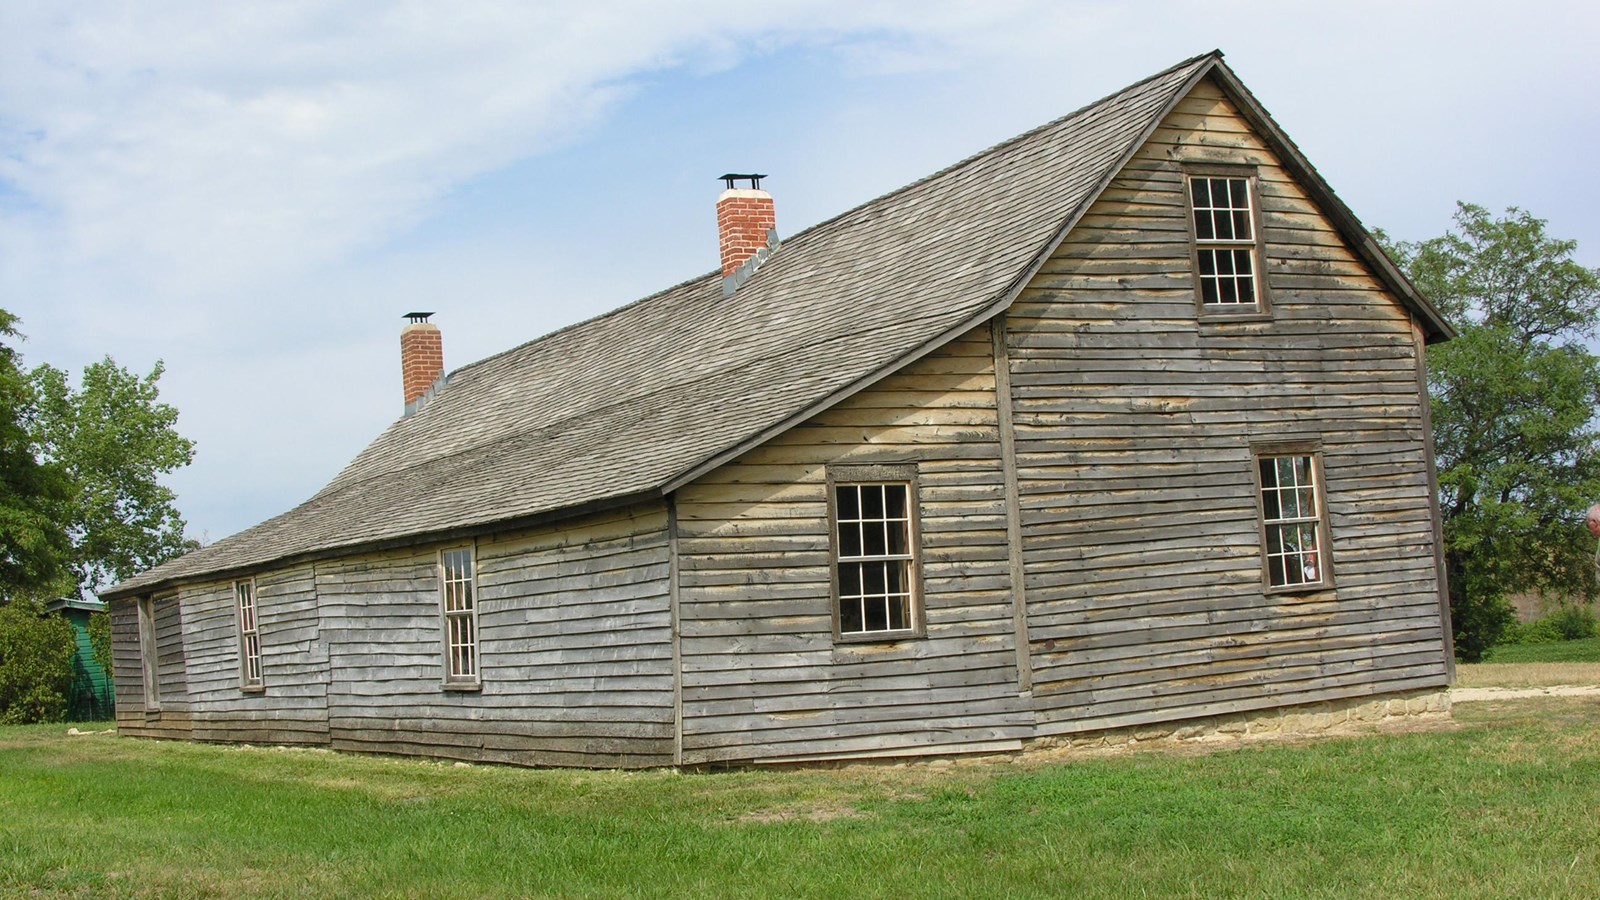 A large wooden barn with a sloping roof.